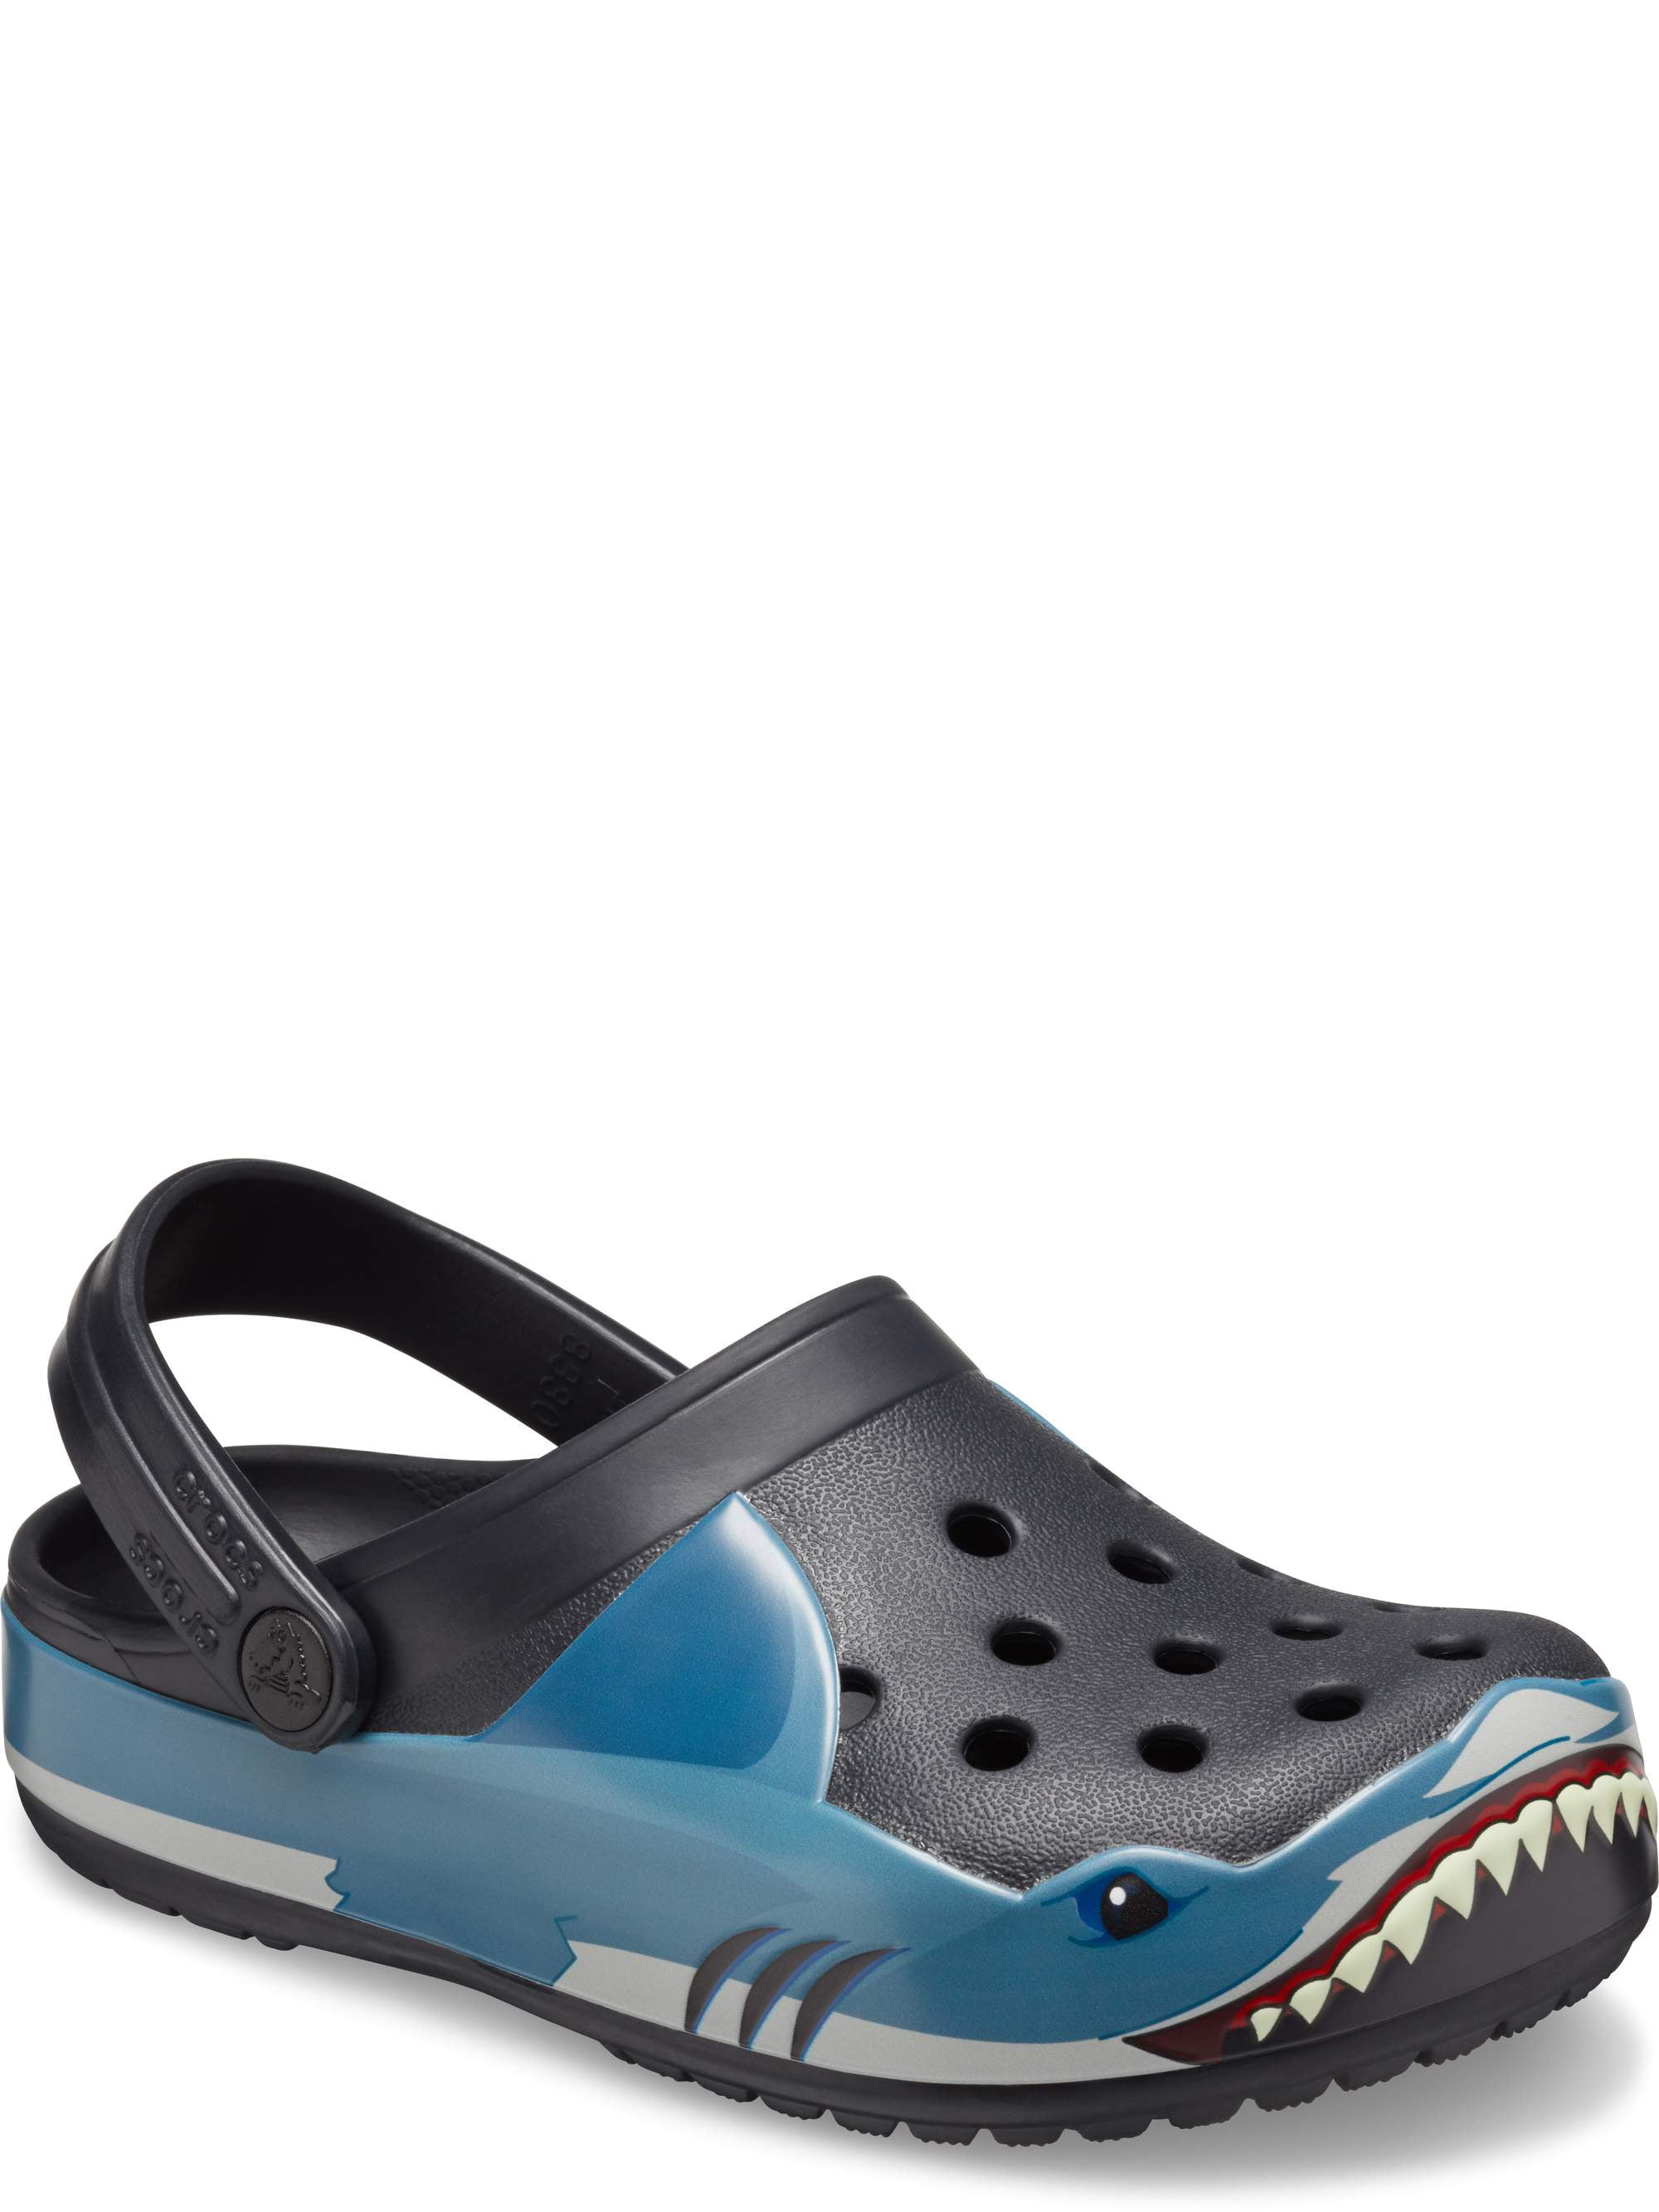 crocs for 6 year old boy